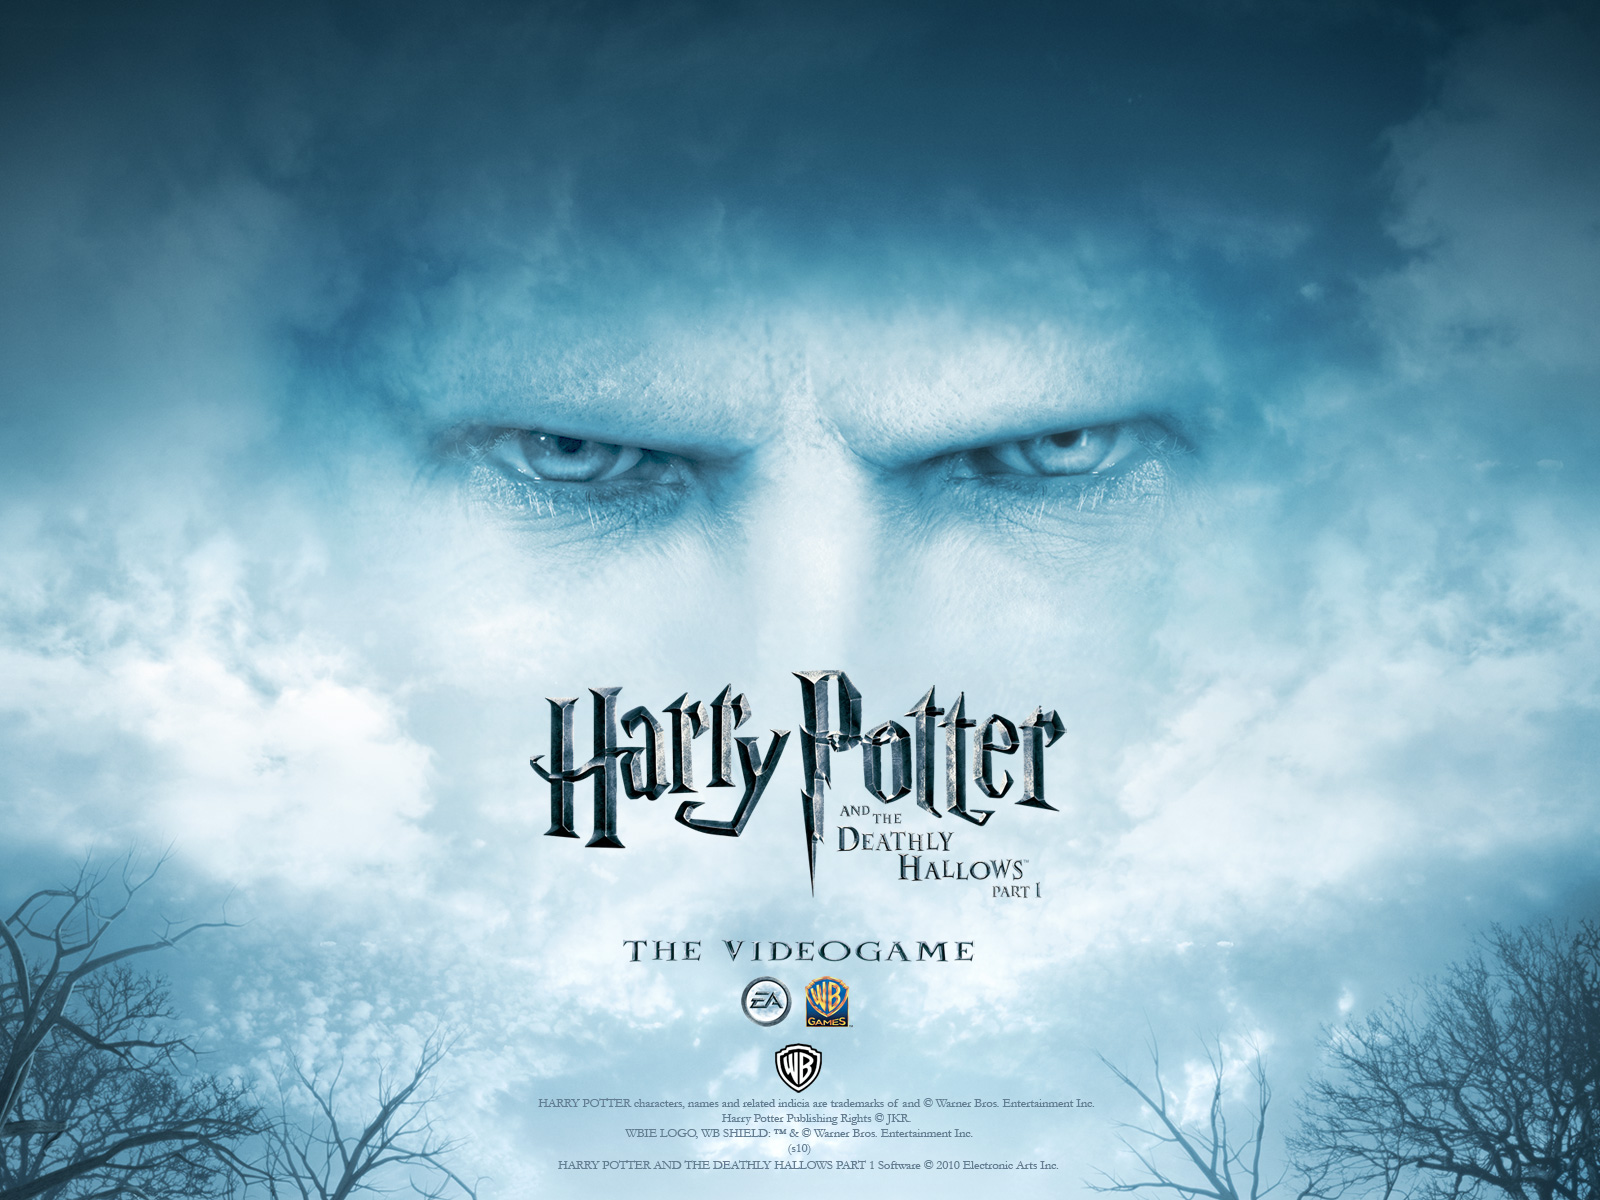 Voldemort Harry Potter And The Deathly Hallows